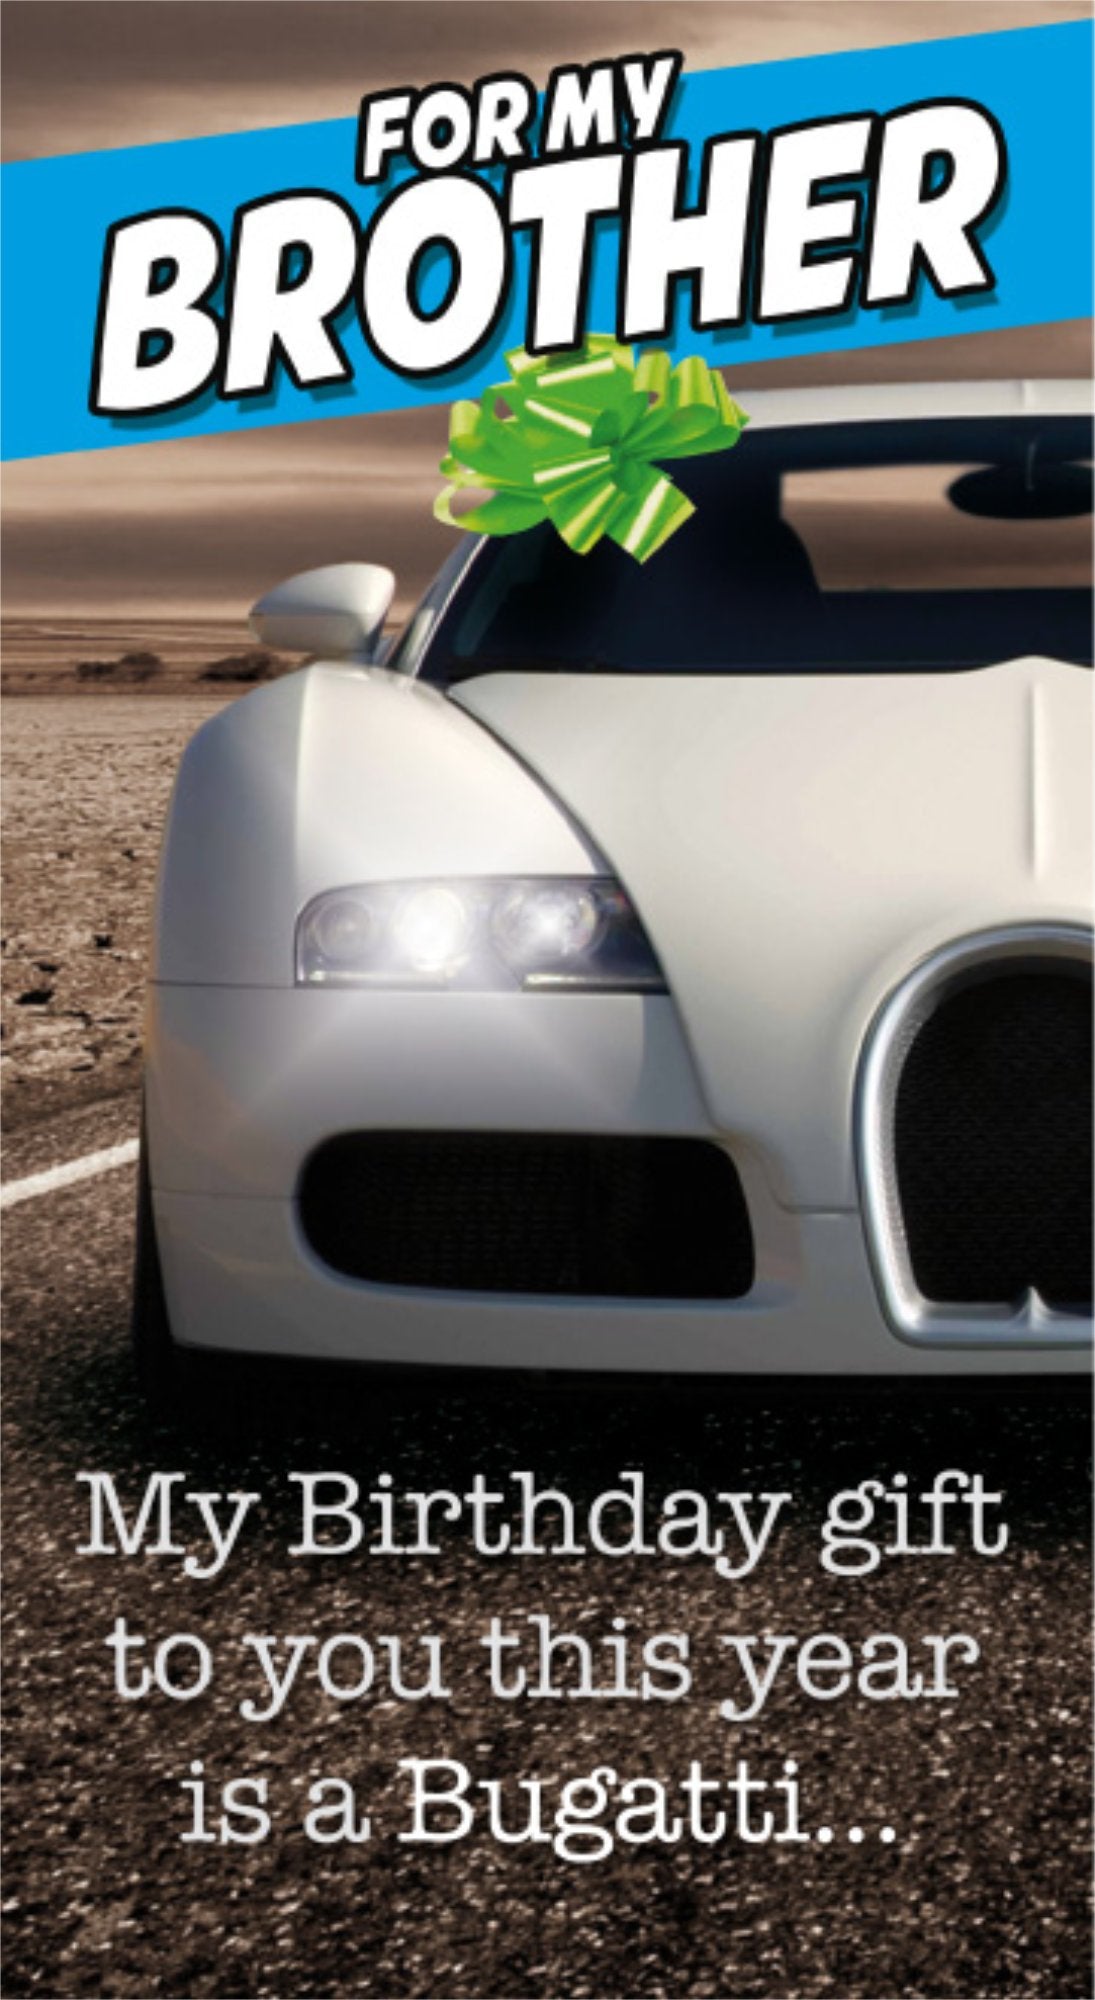 Photograph of Bugatti Brother Funny Birthday Greetings Card at Nicole's Shop